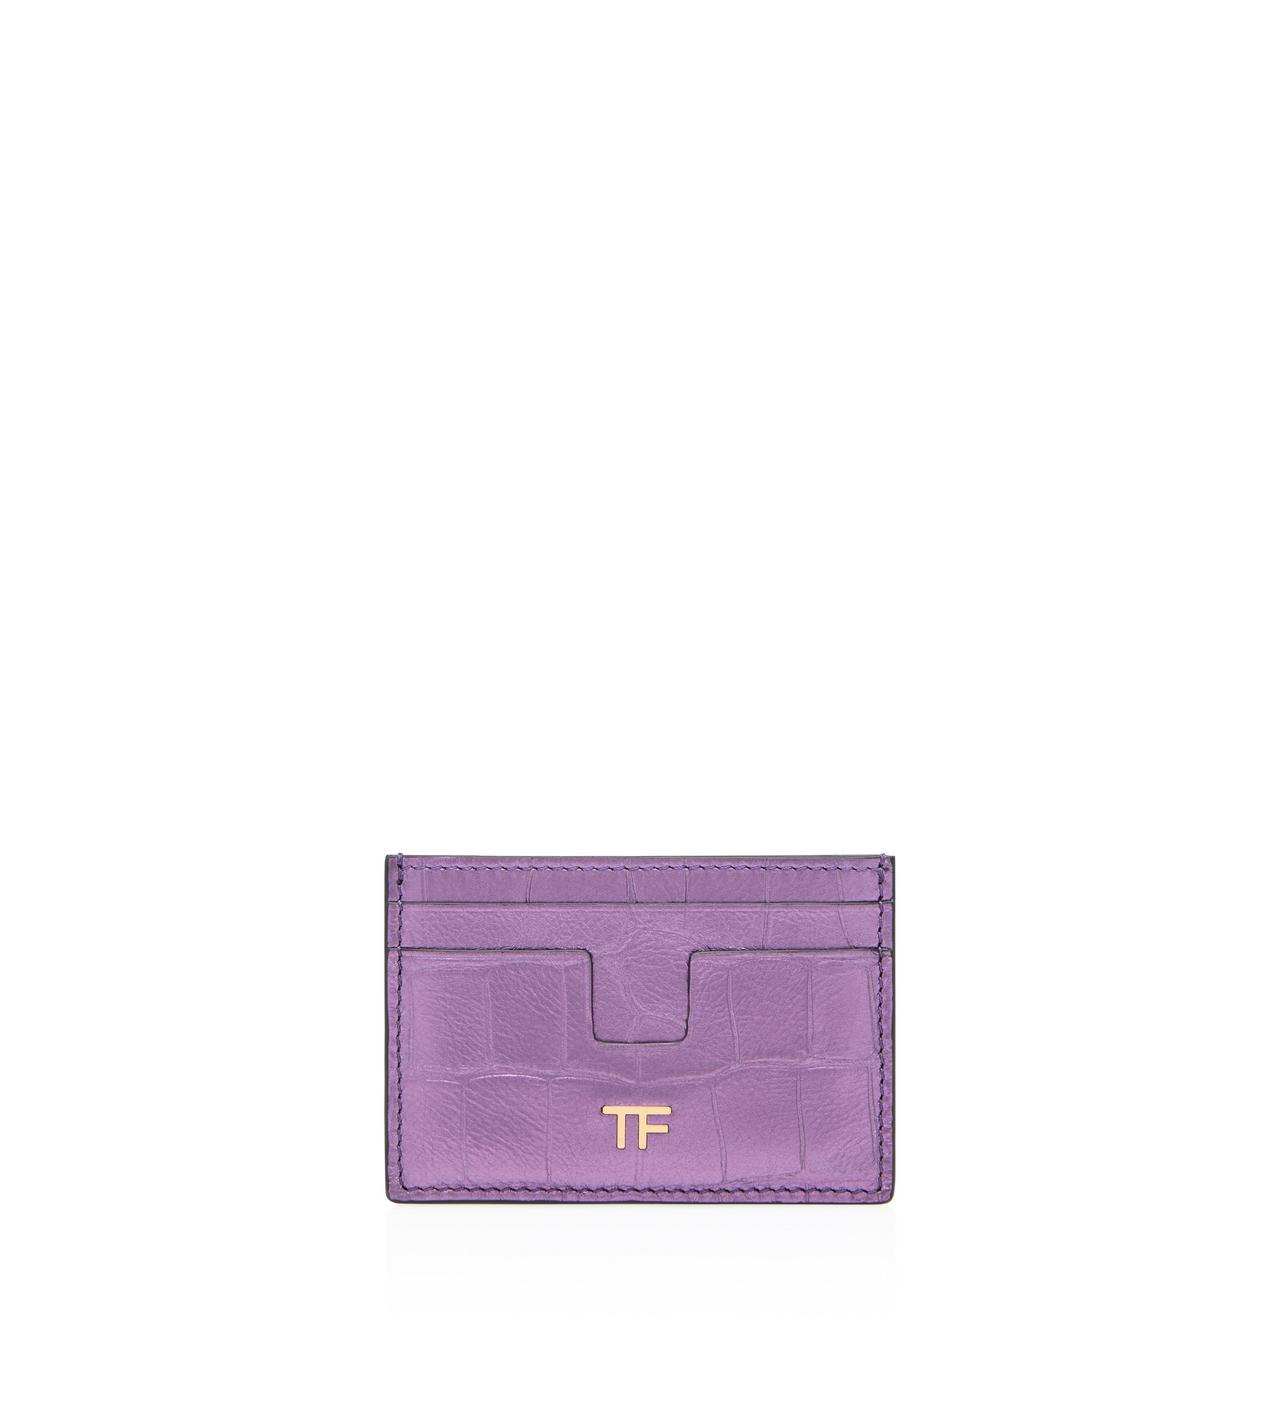 METALLIC STAMPED LEATHER CLASSIC TF CARD HOLDER image number 0